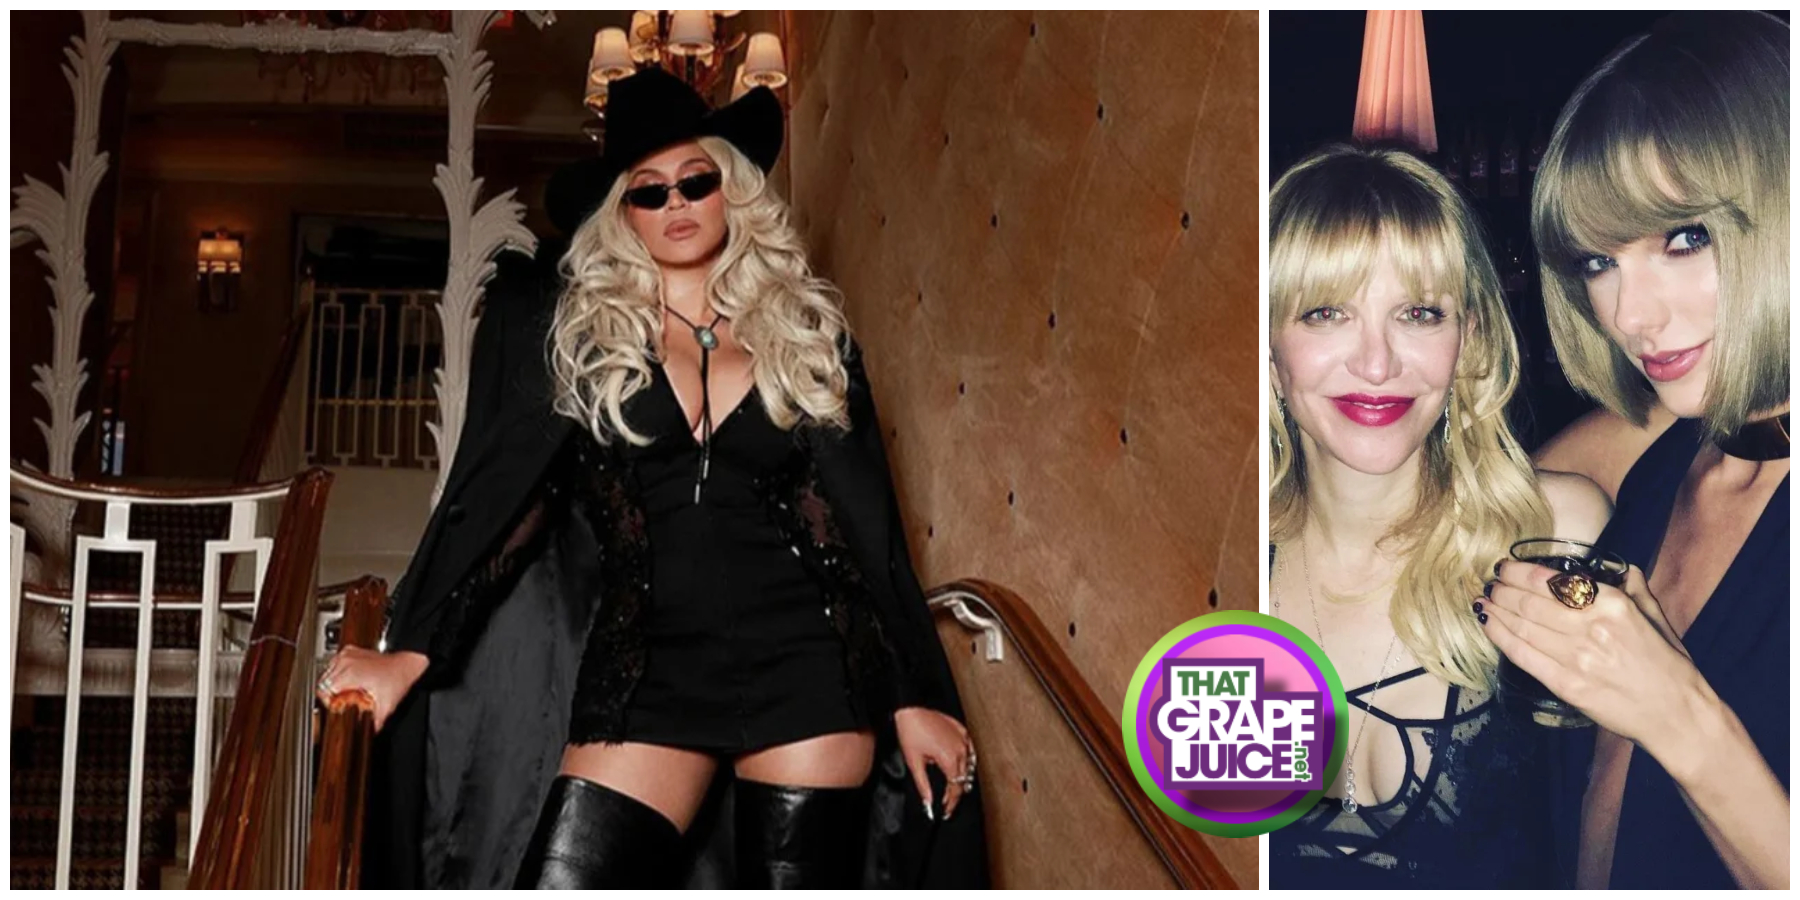 Ouch! Courtney Love Slammed By Swifties & Beyhive for Dissing Beyonce’s ‘Cowboy Carter’ & Saying Taylor Swift is “Not Important or Interesting”